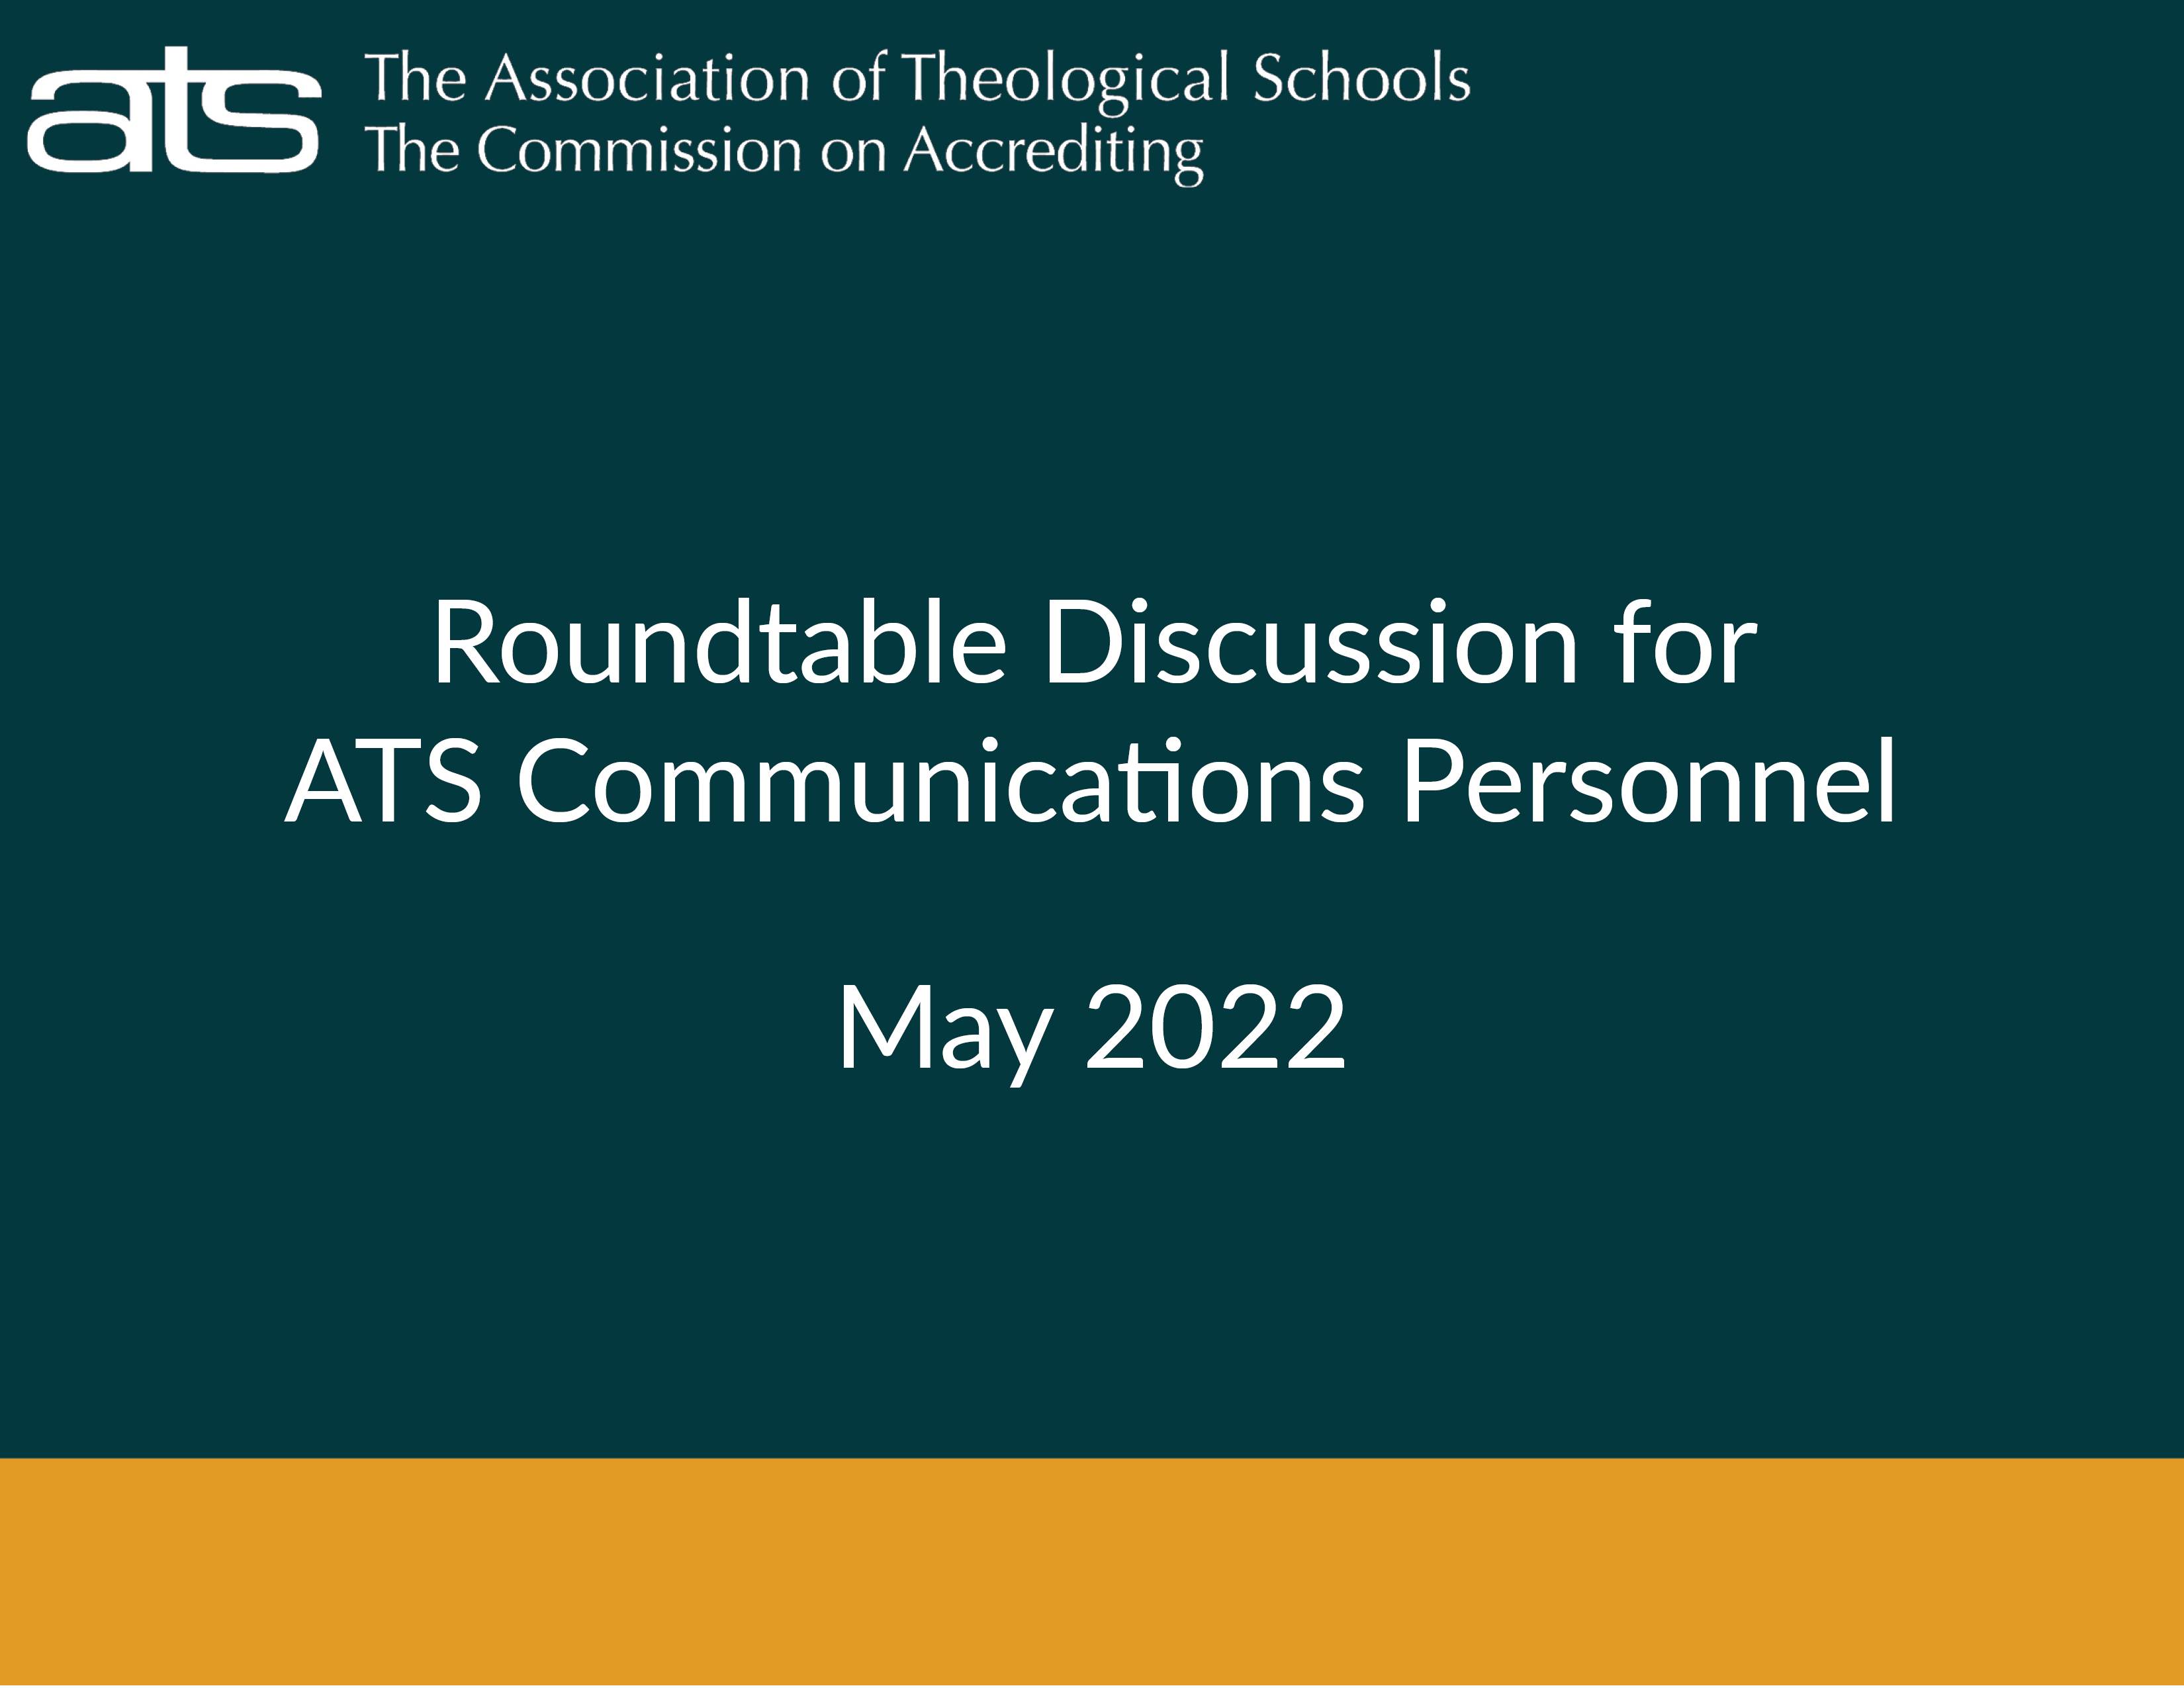 View the Zoom conversation held among communication professionals who work at ATS schools.